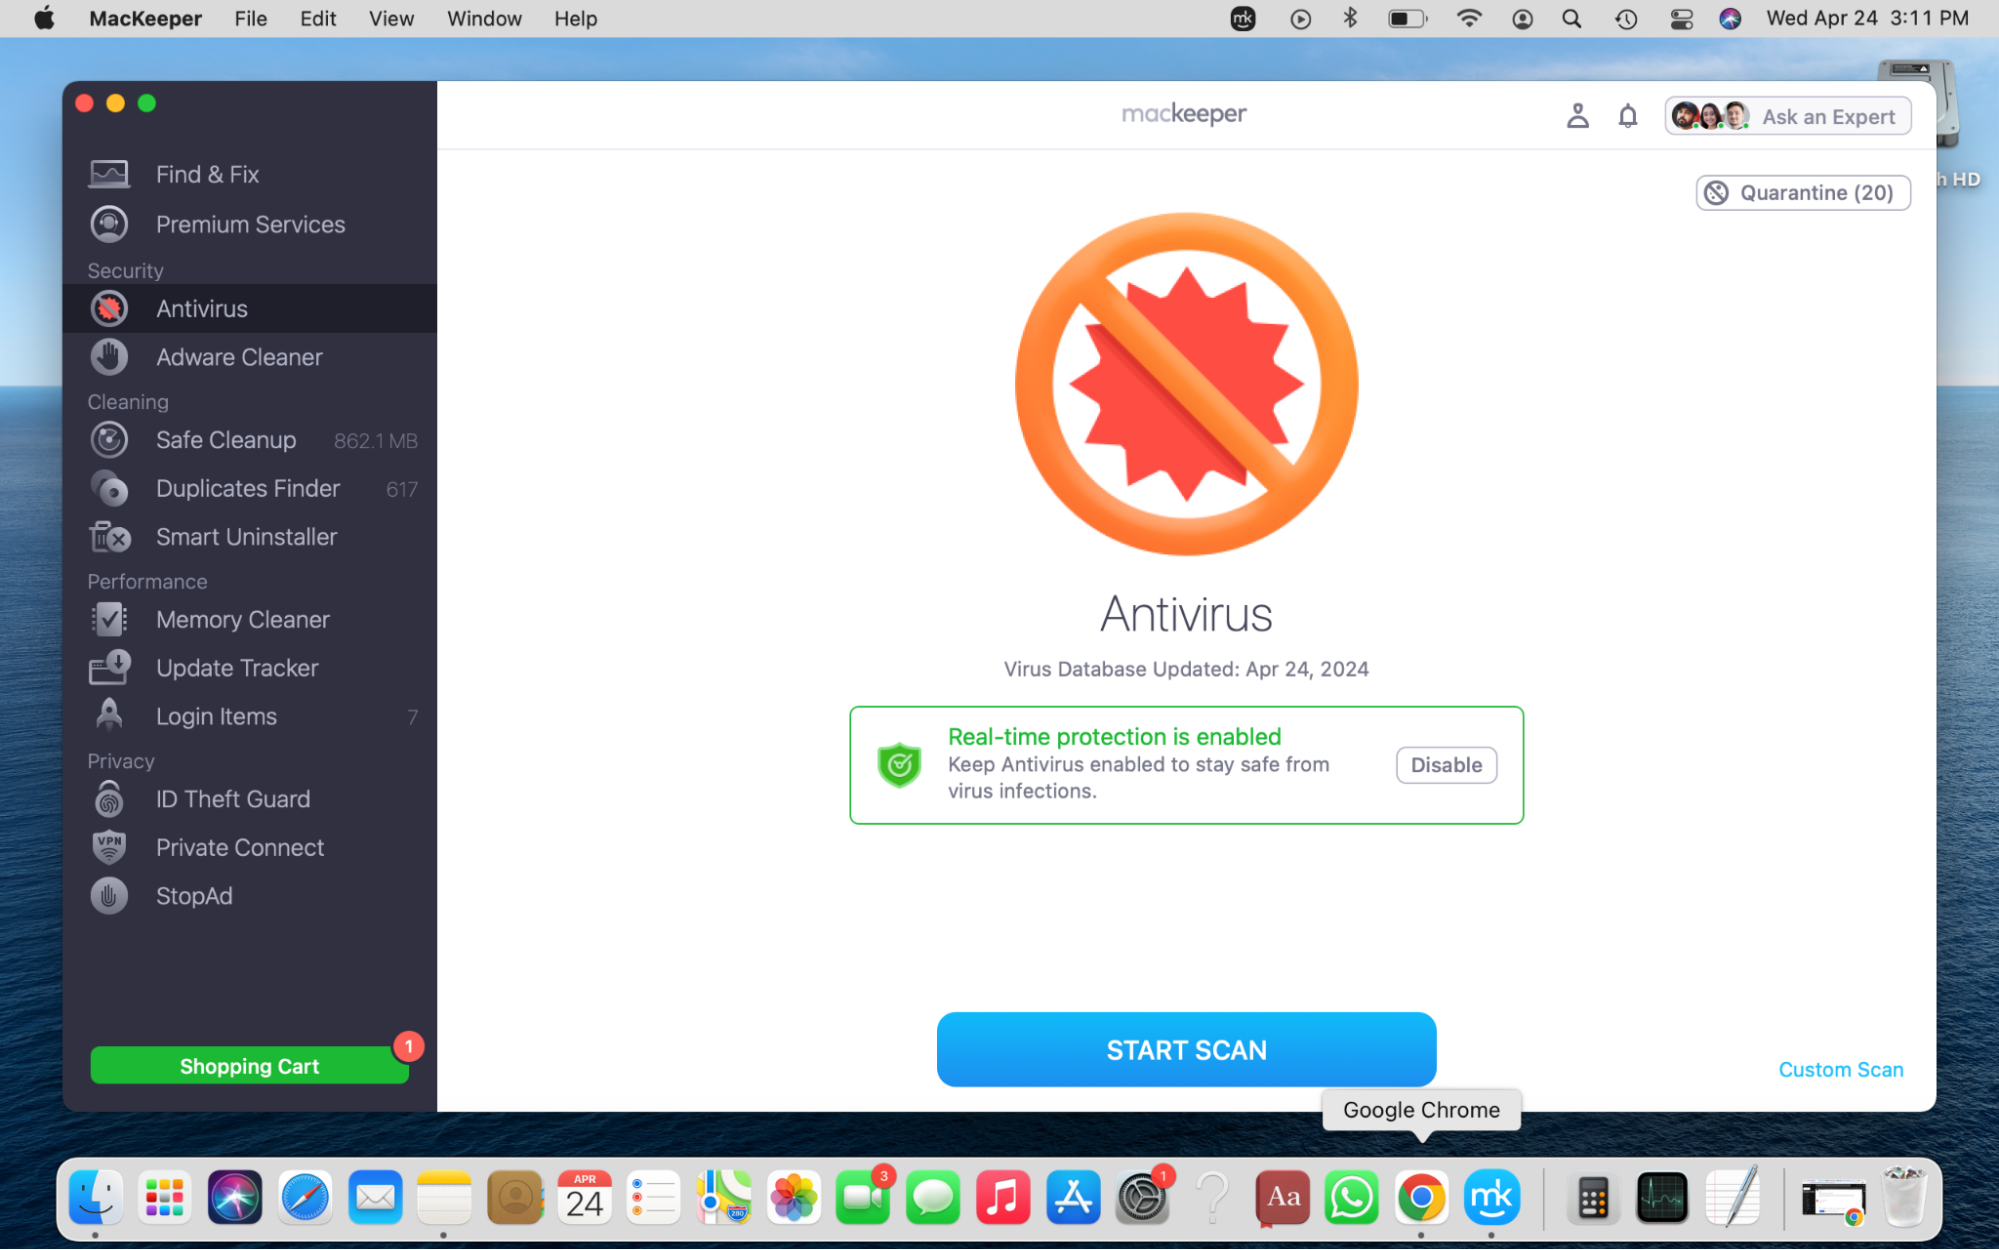 MacKeeper's Antivirus tool offers great virus and malware protection. To use it, open the app and click on Antivirus in the sidebar. Enable real-time protection and hit the Start Scan button.